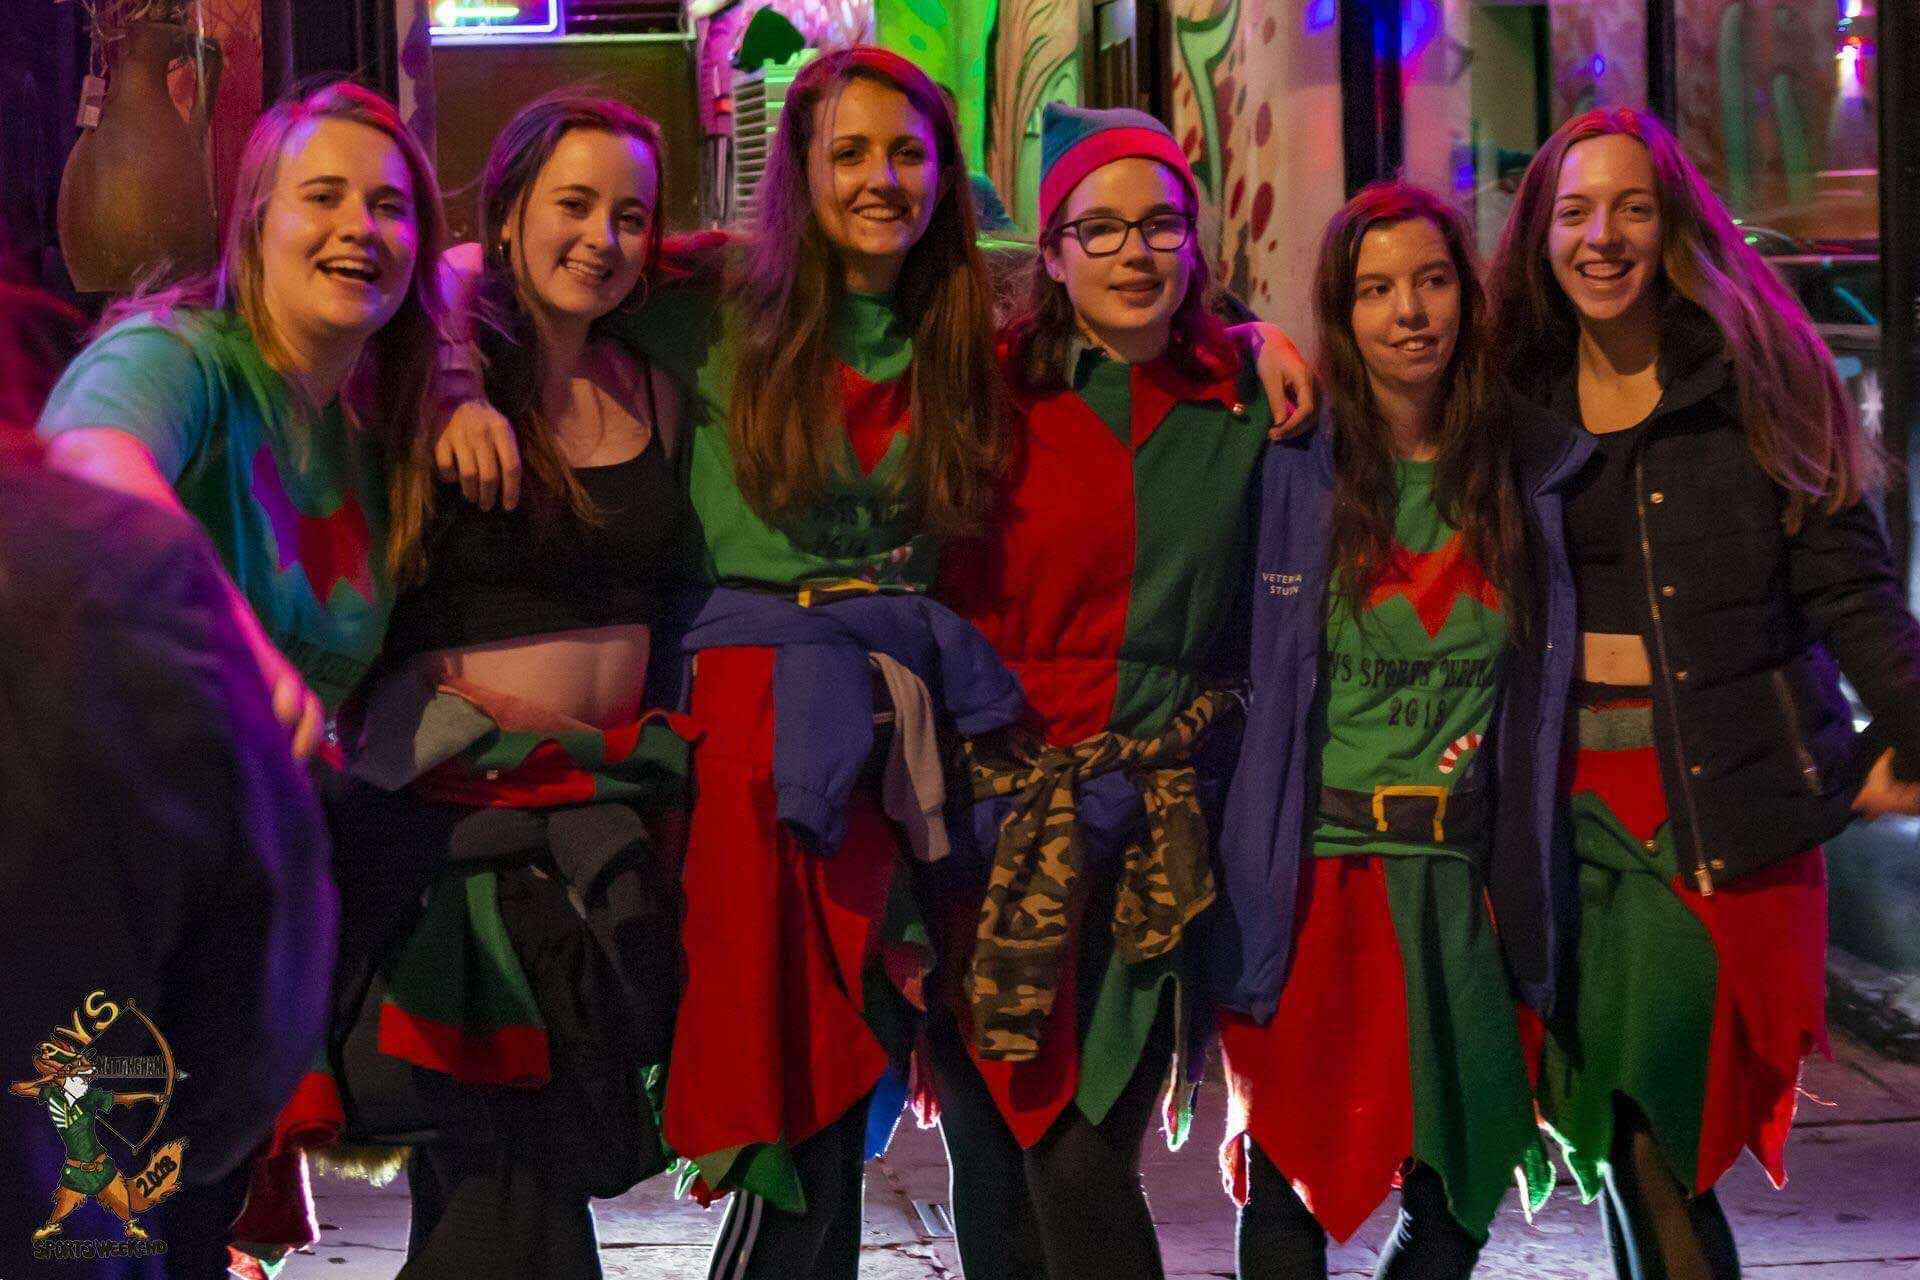 Friends in elf costumes pose for group photo on night out 